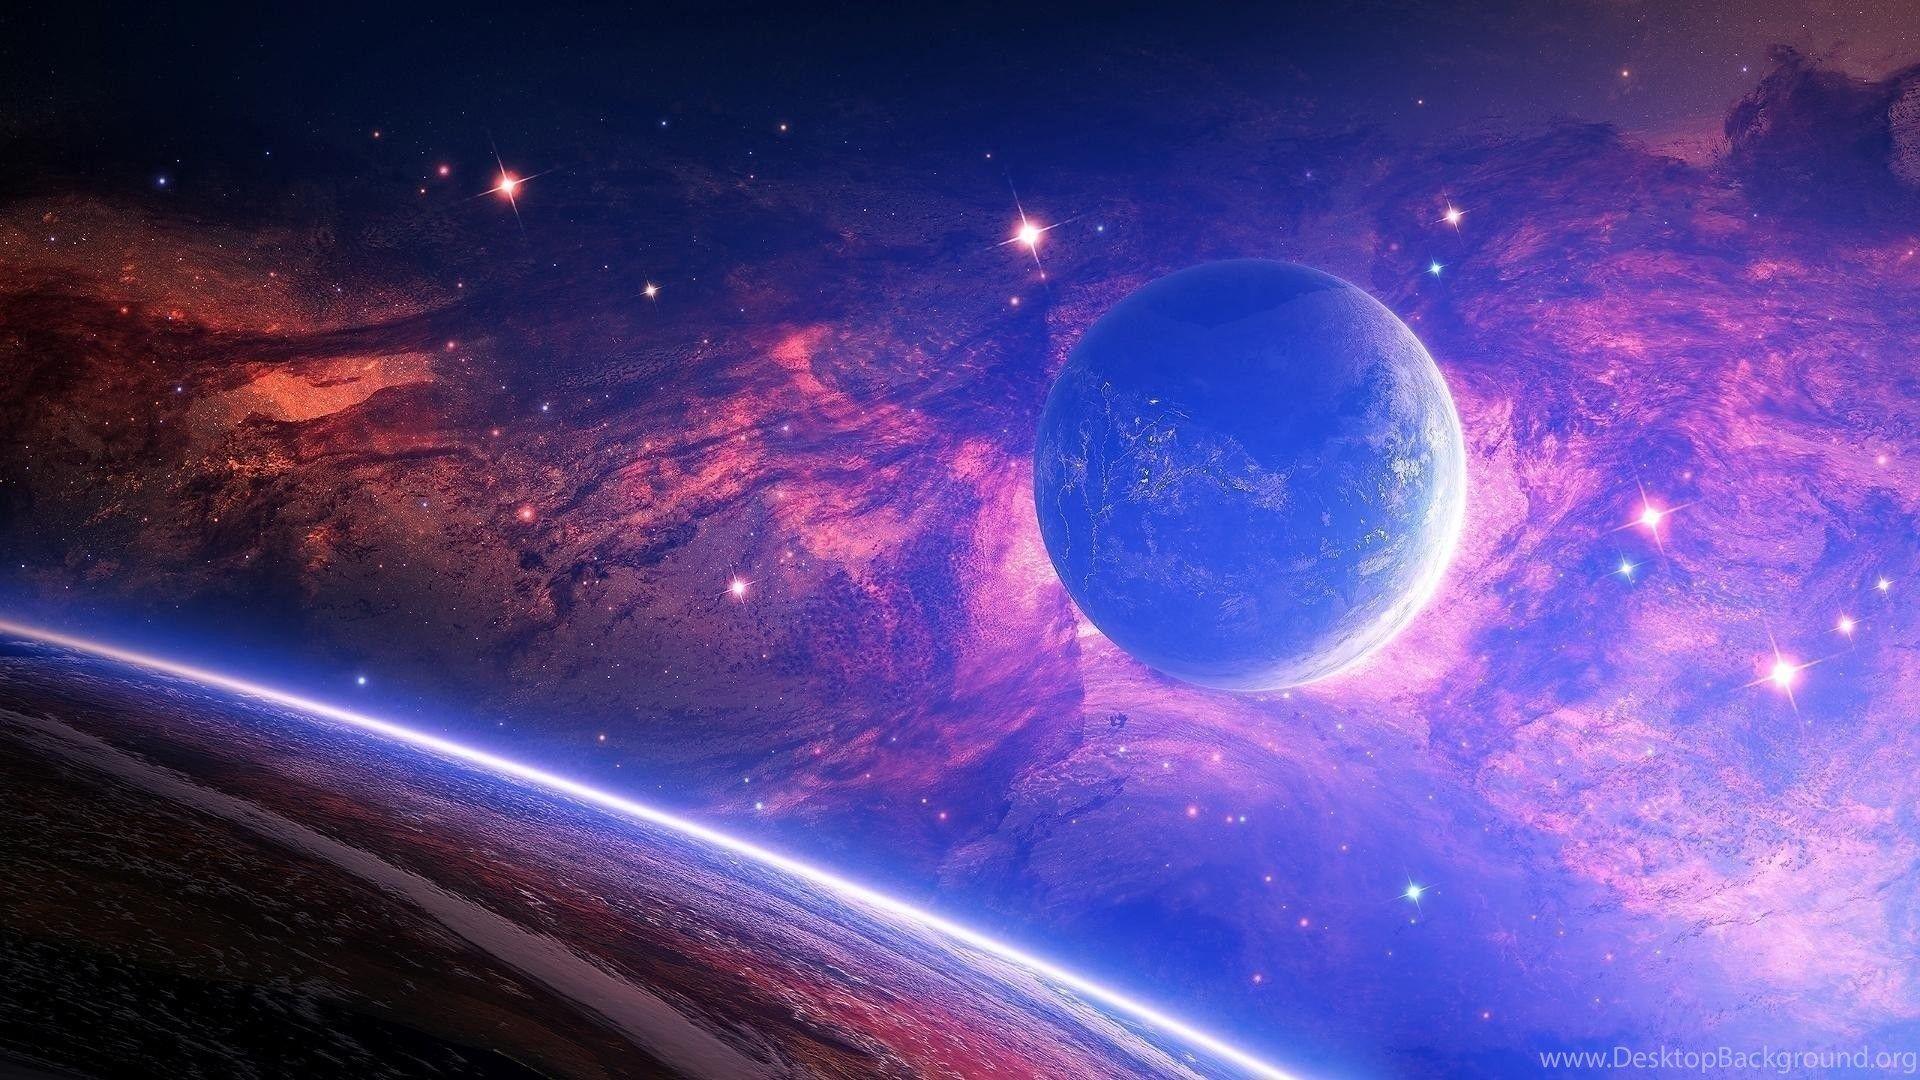 Blue Planet On The Background Of Pink Galaxy Desktop Background